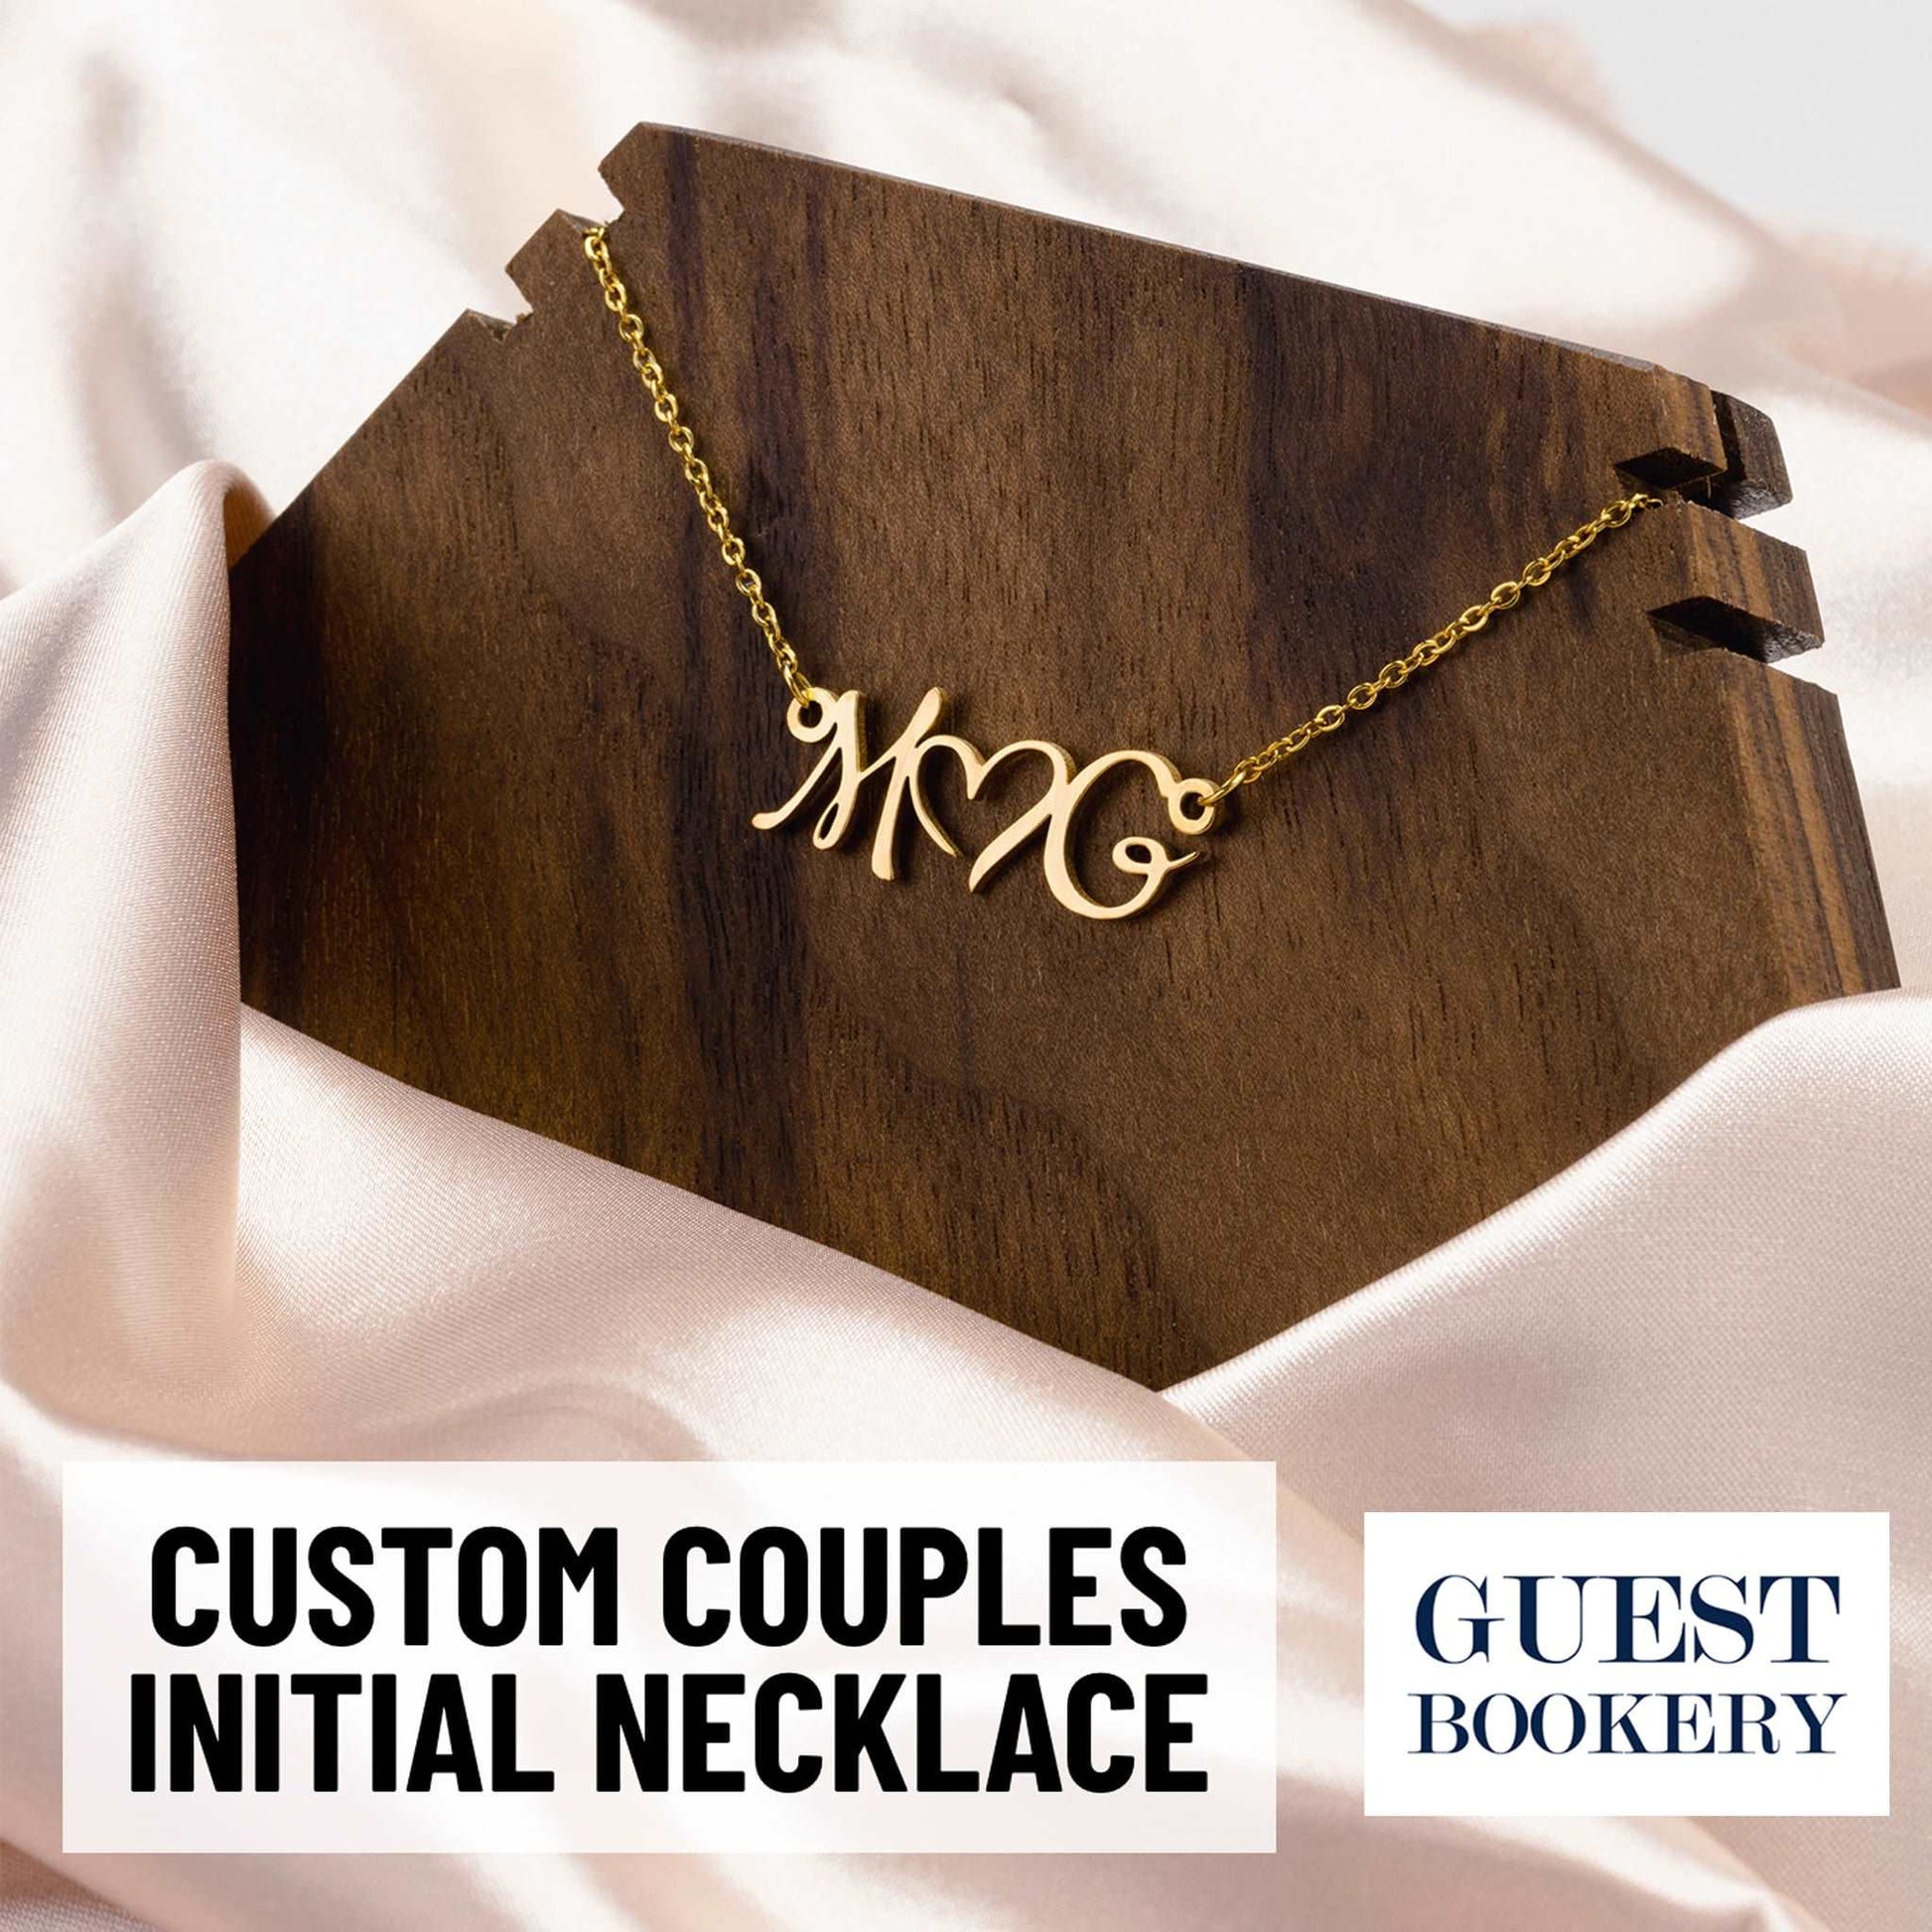 Custom Couples Initial Necklace